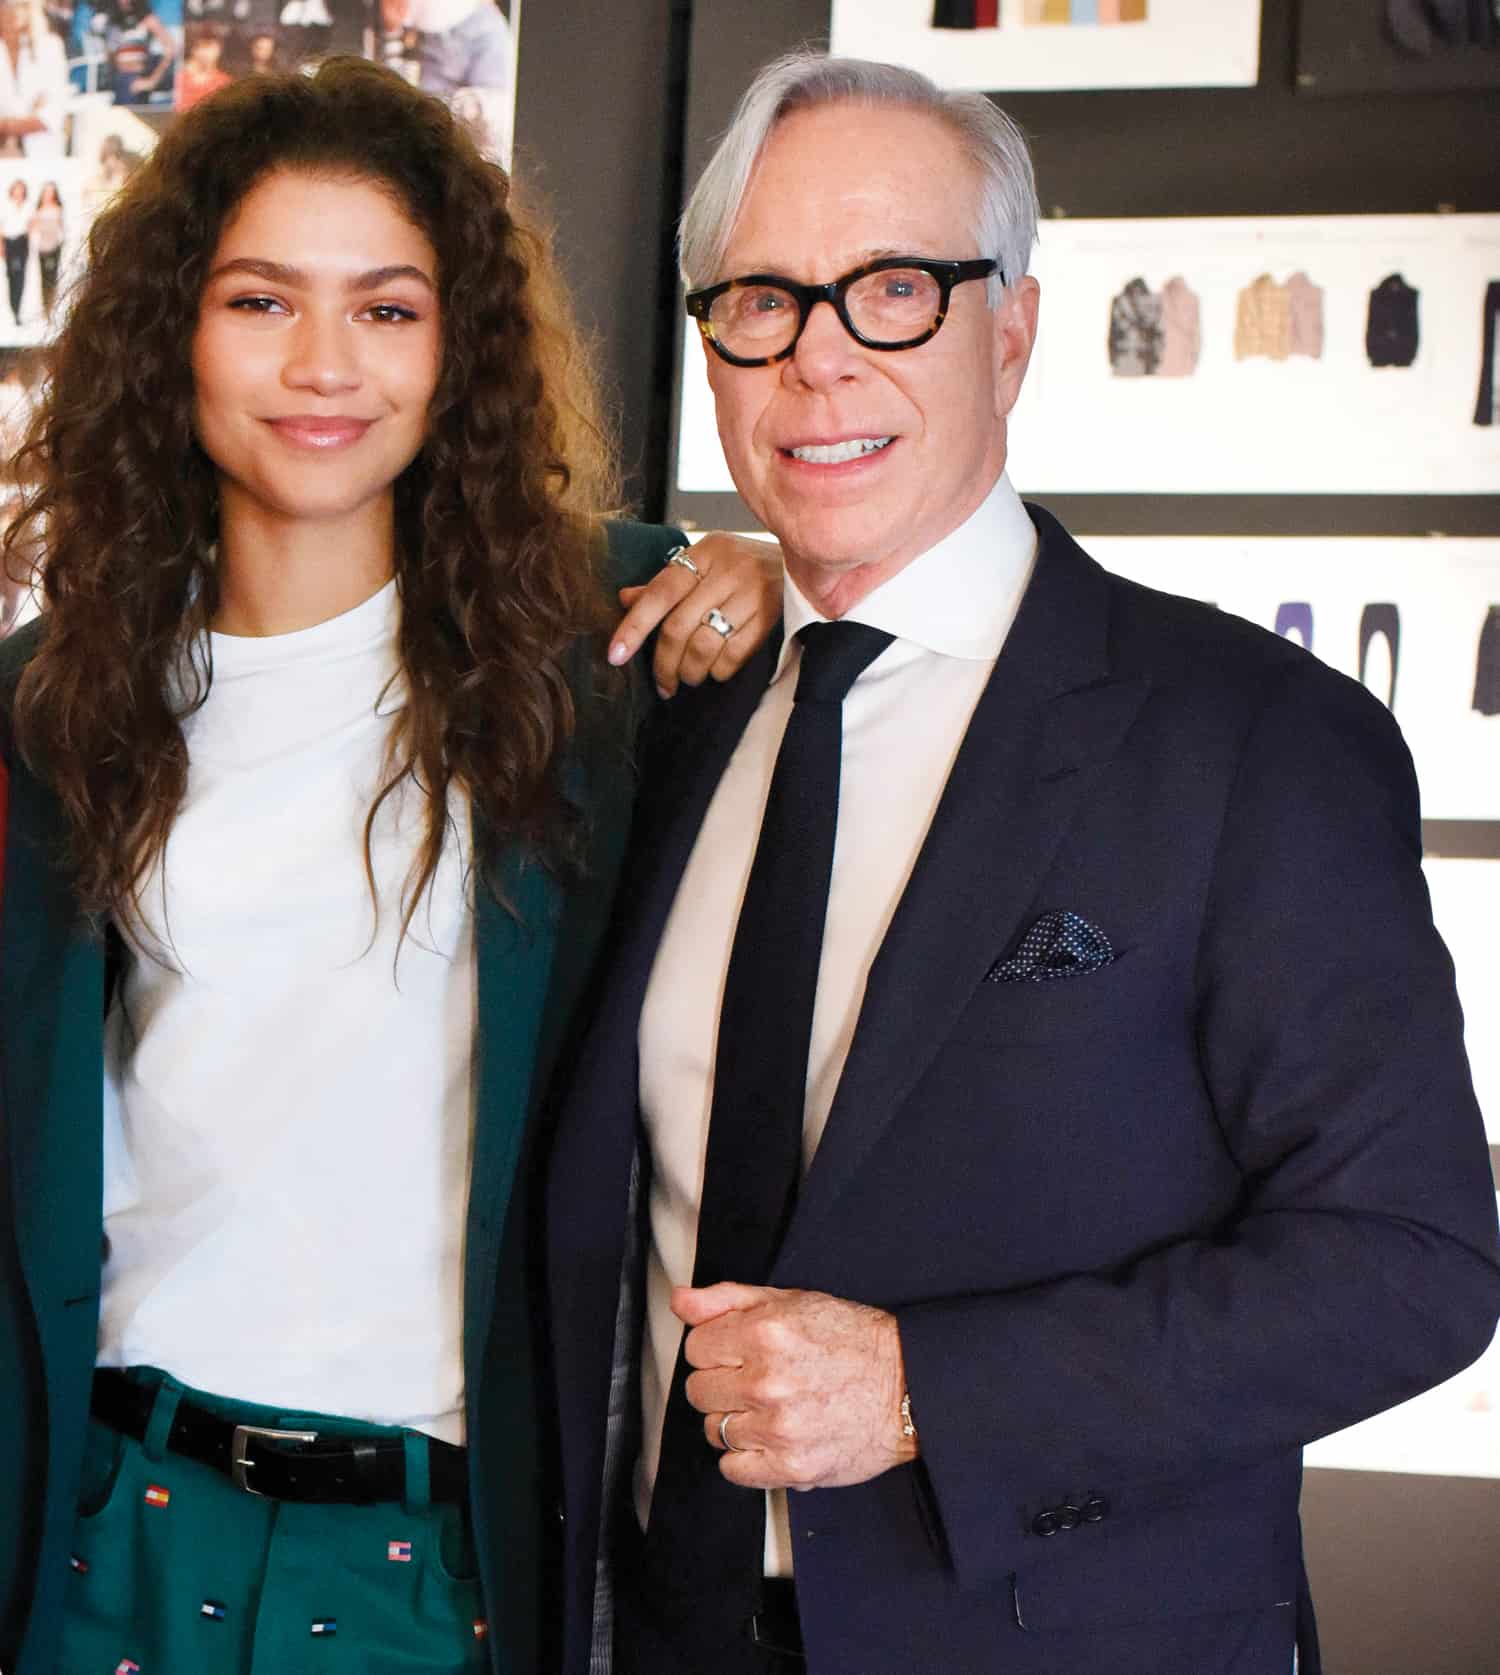 EXCLUSIVE: Tommy Hilfiger His Incredible 35 Years In Business - Daily Front Row